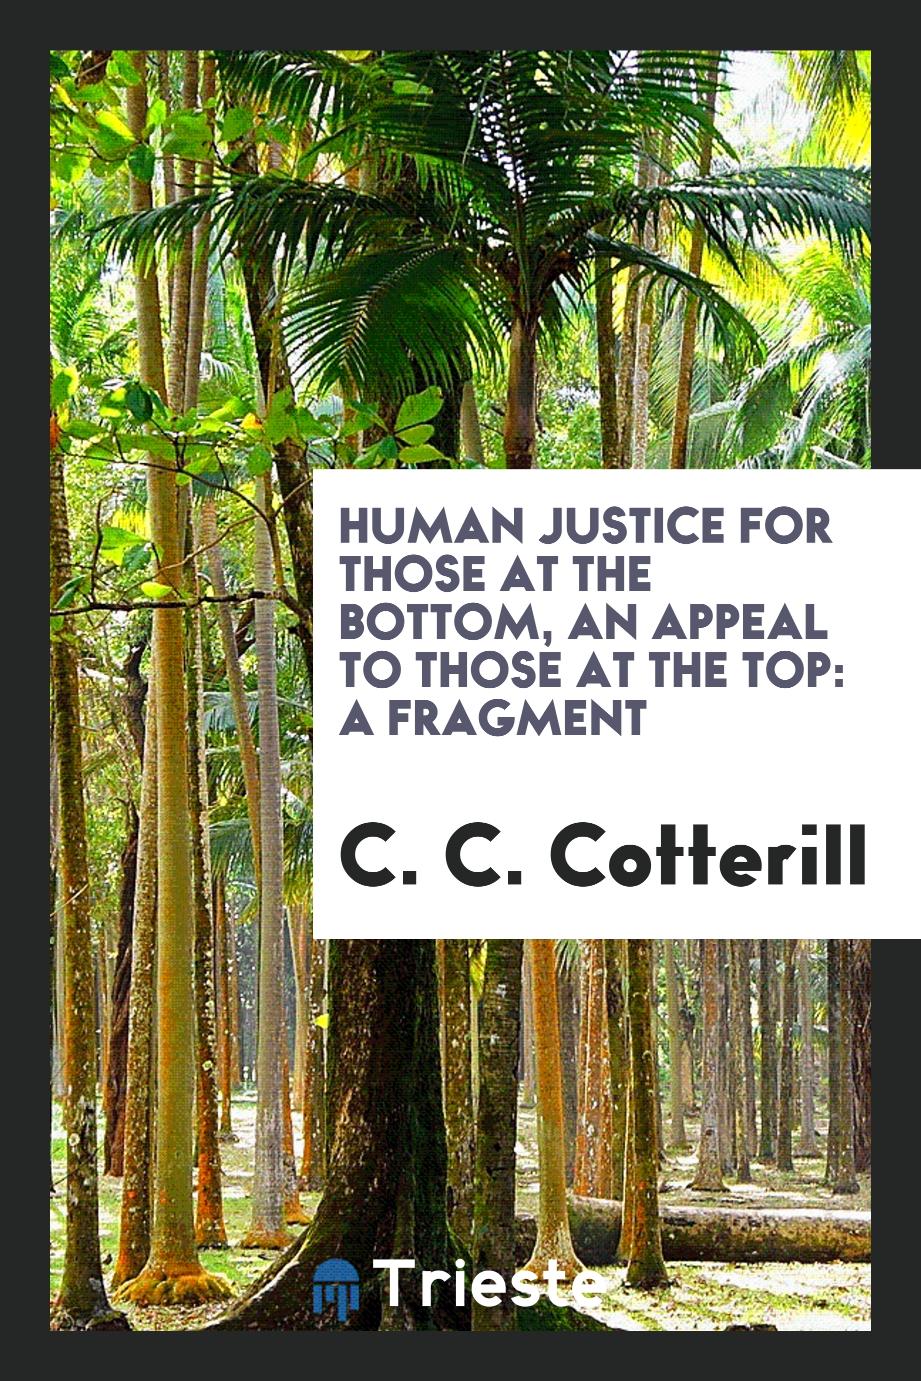 Human justice for those at the bottom, an appeal to those at the top: a fragment